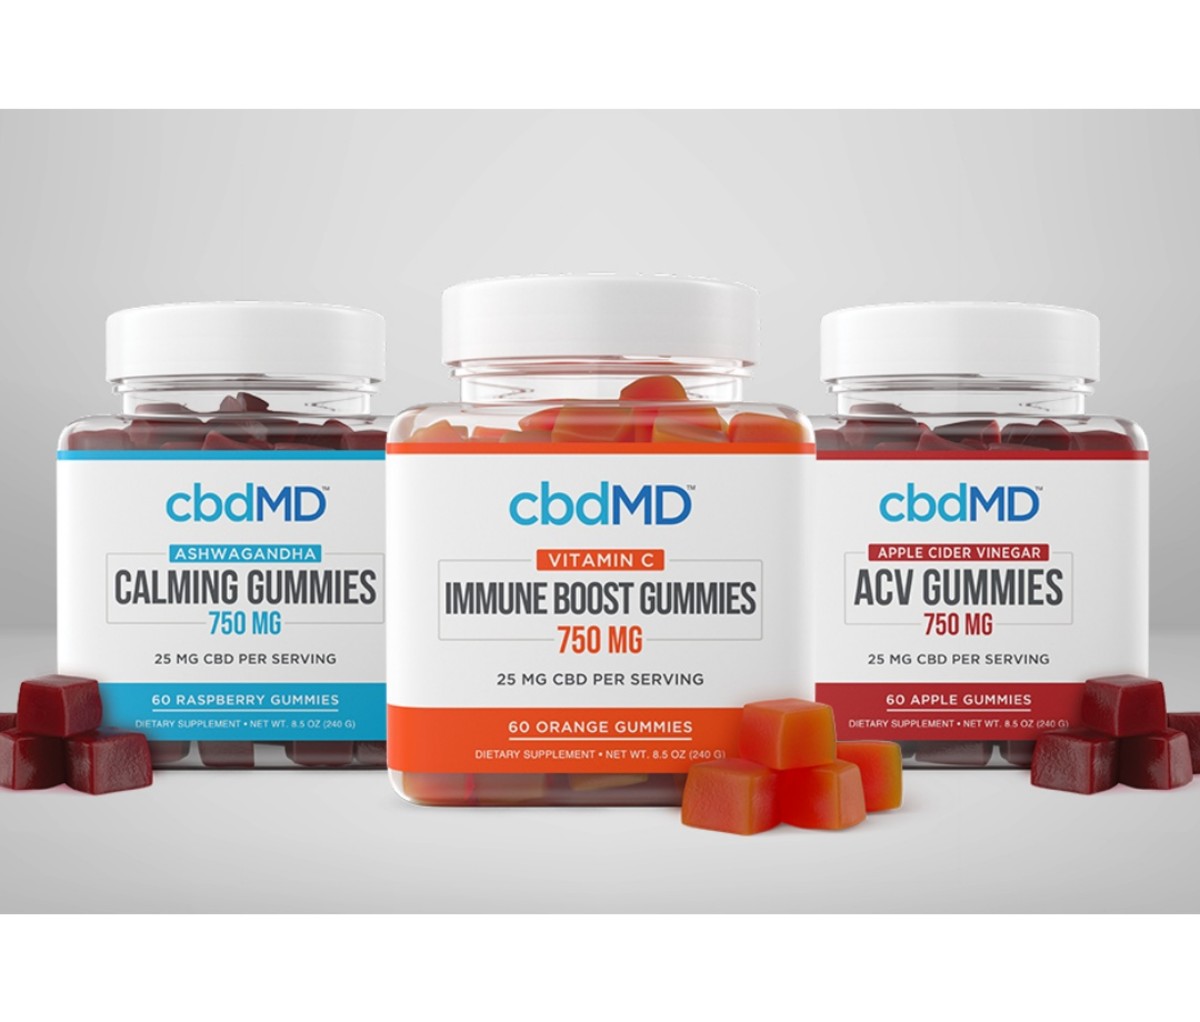 cbdMD gummies and bottles on a grey background